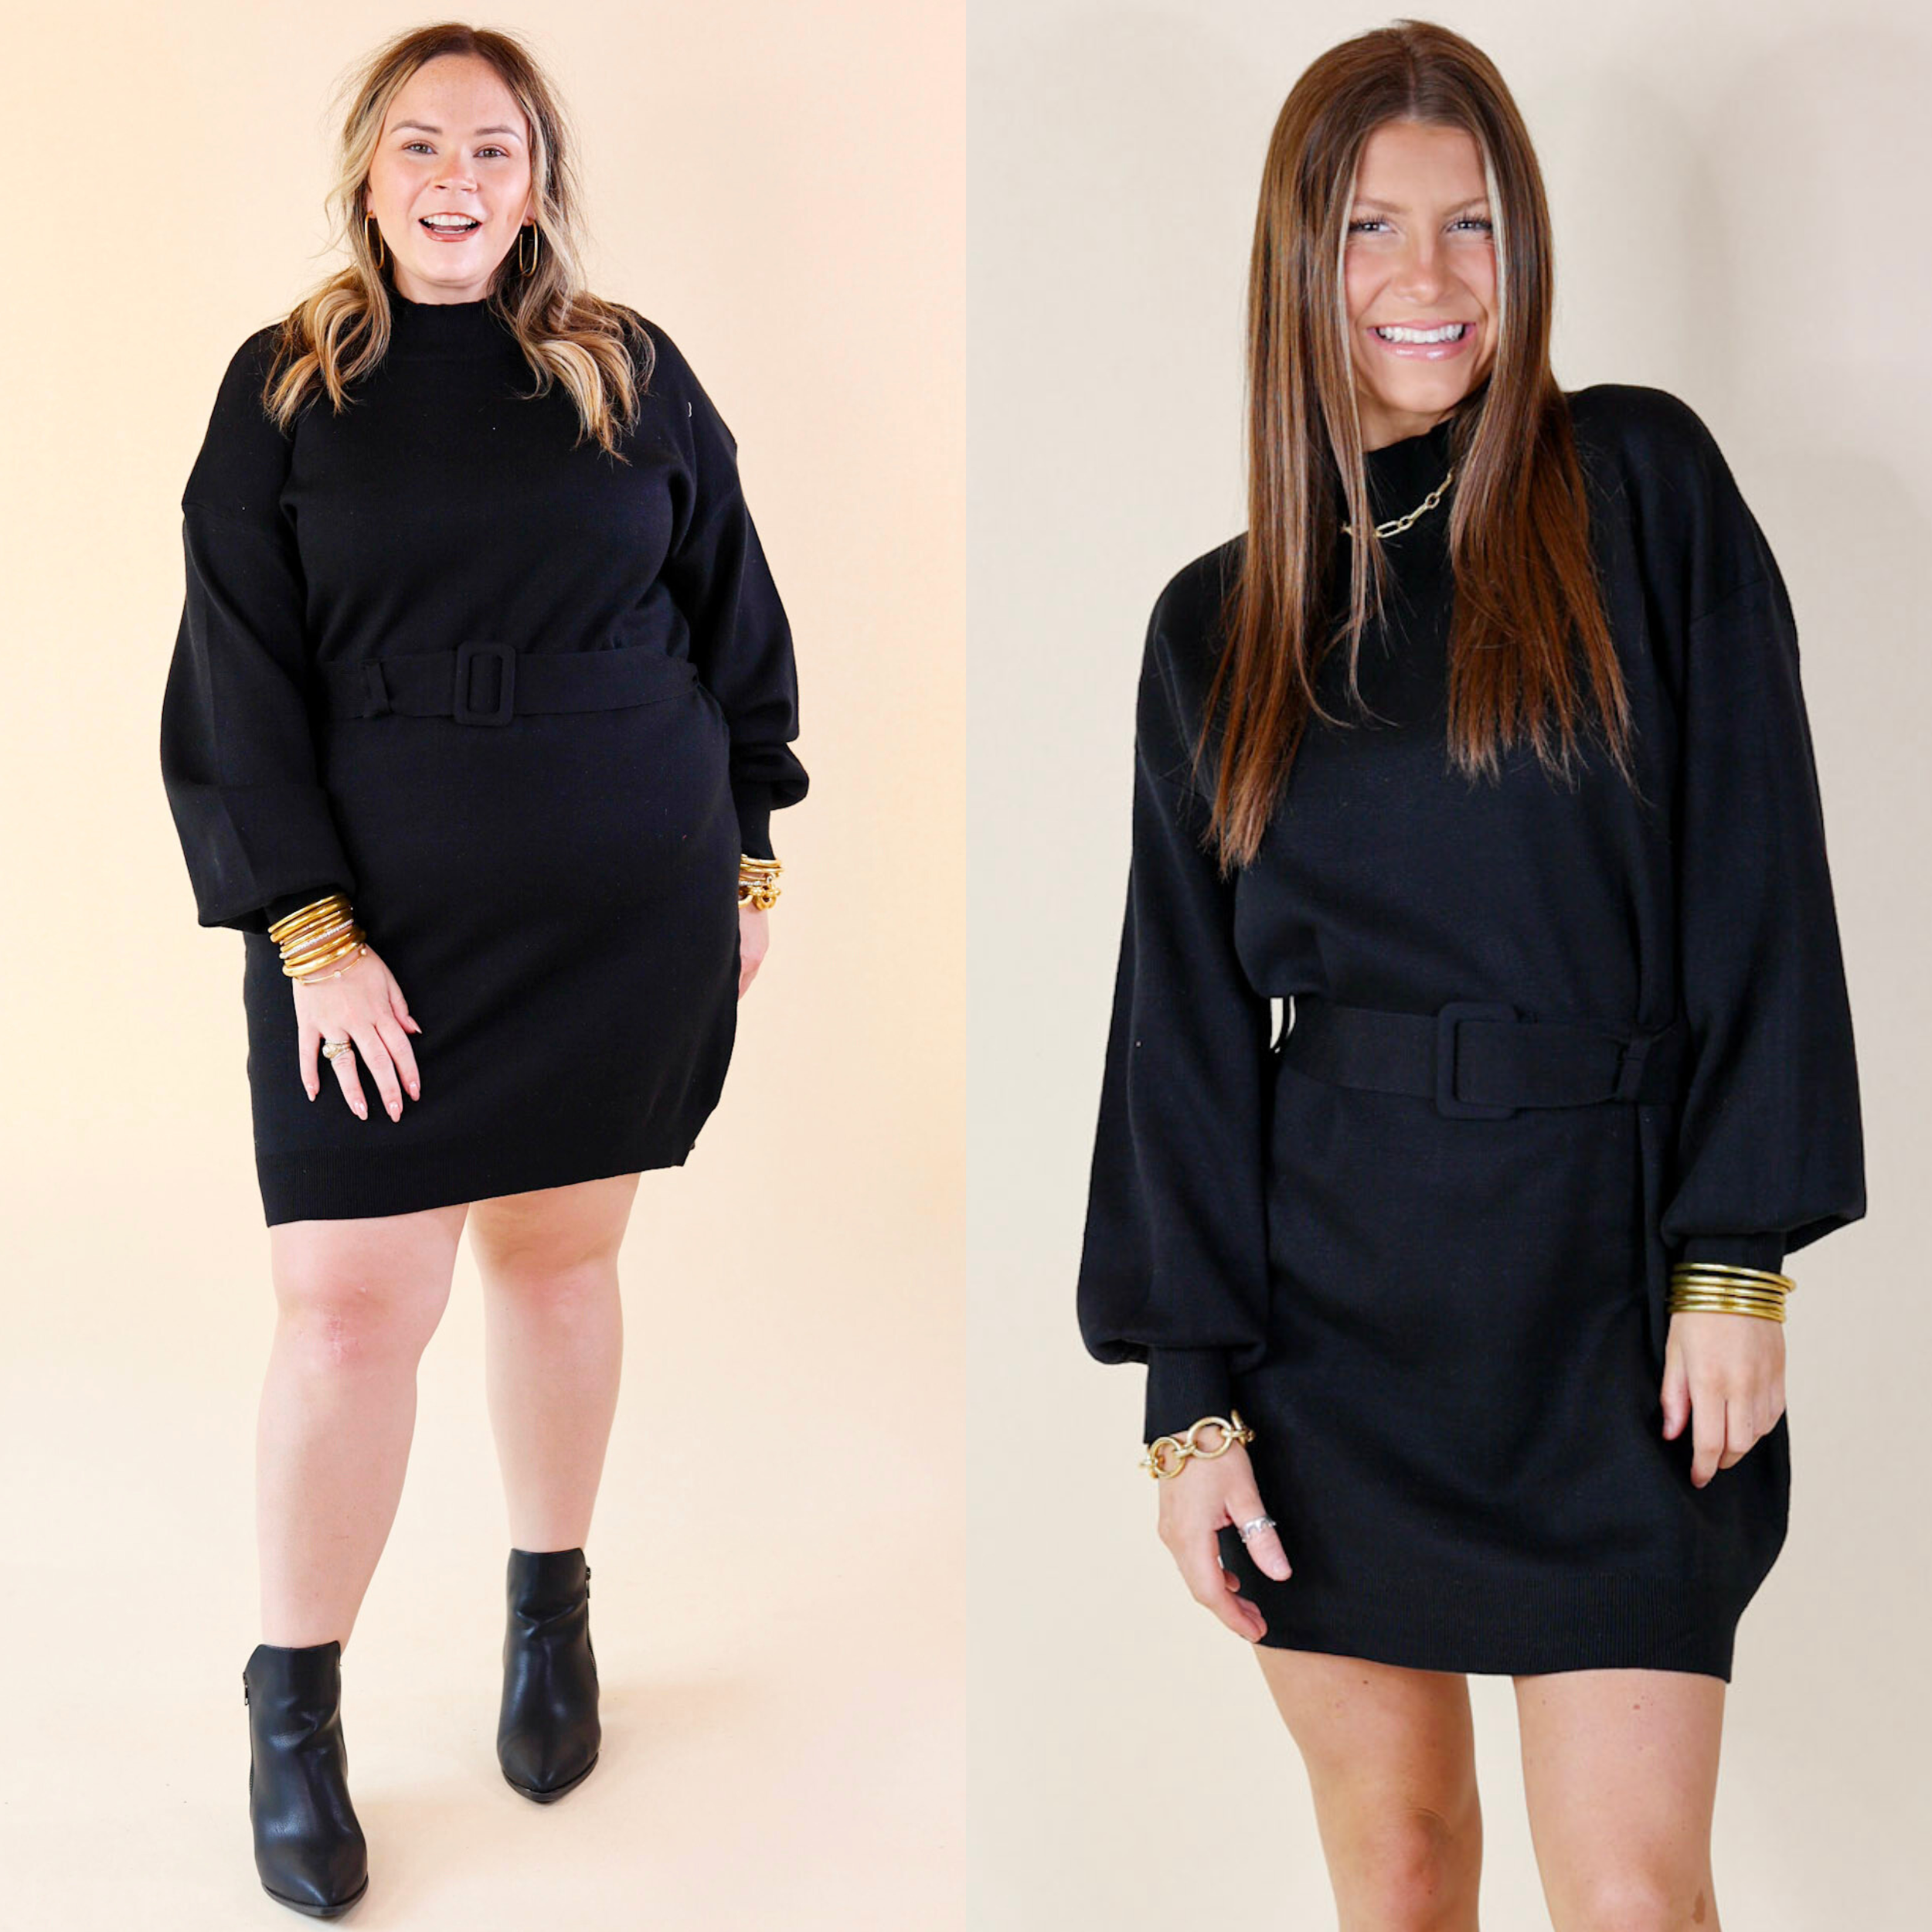 Models are wearing a black long sleeve sweater dress with a  belted waist. Both models have this dress paired with black booties and gold jewelry.